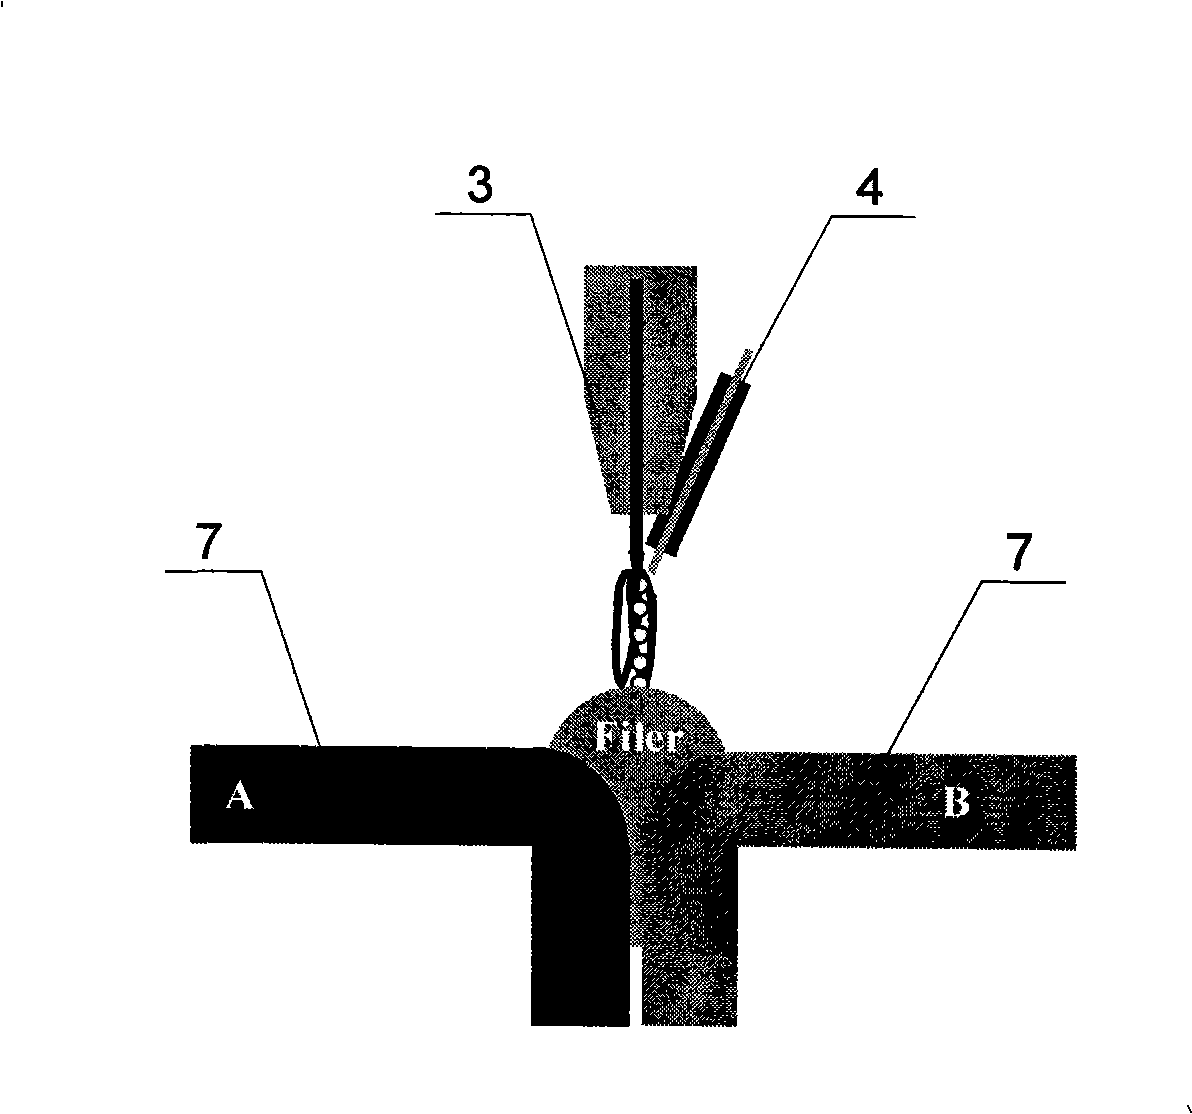 Tungsten electrode-consuming electrode indirect electric arc welding device and its welding method